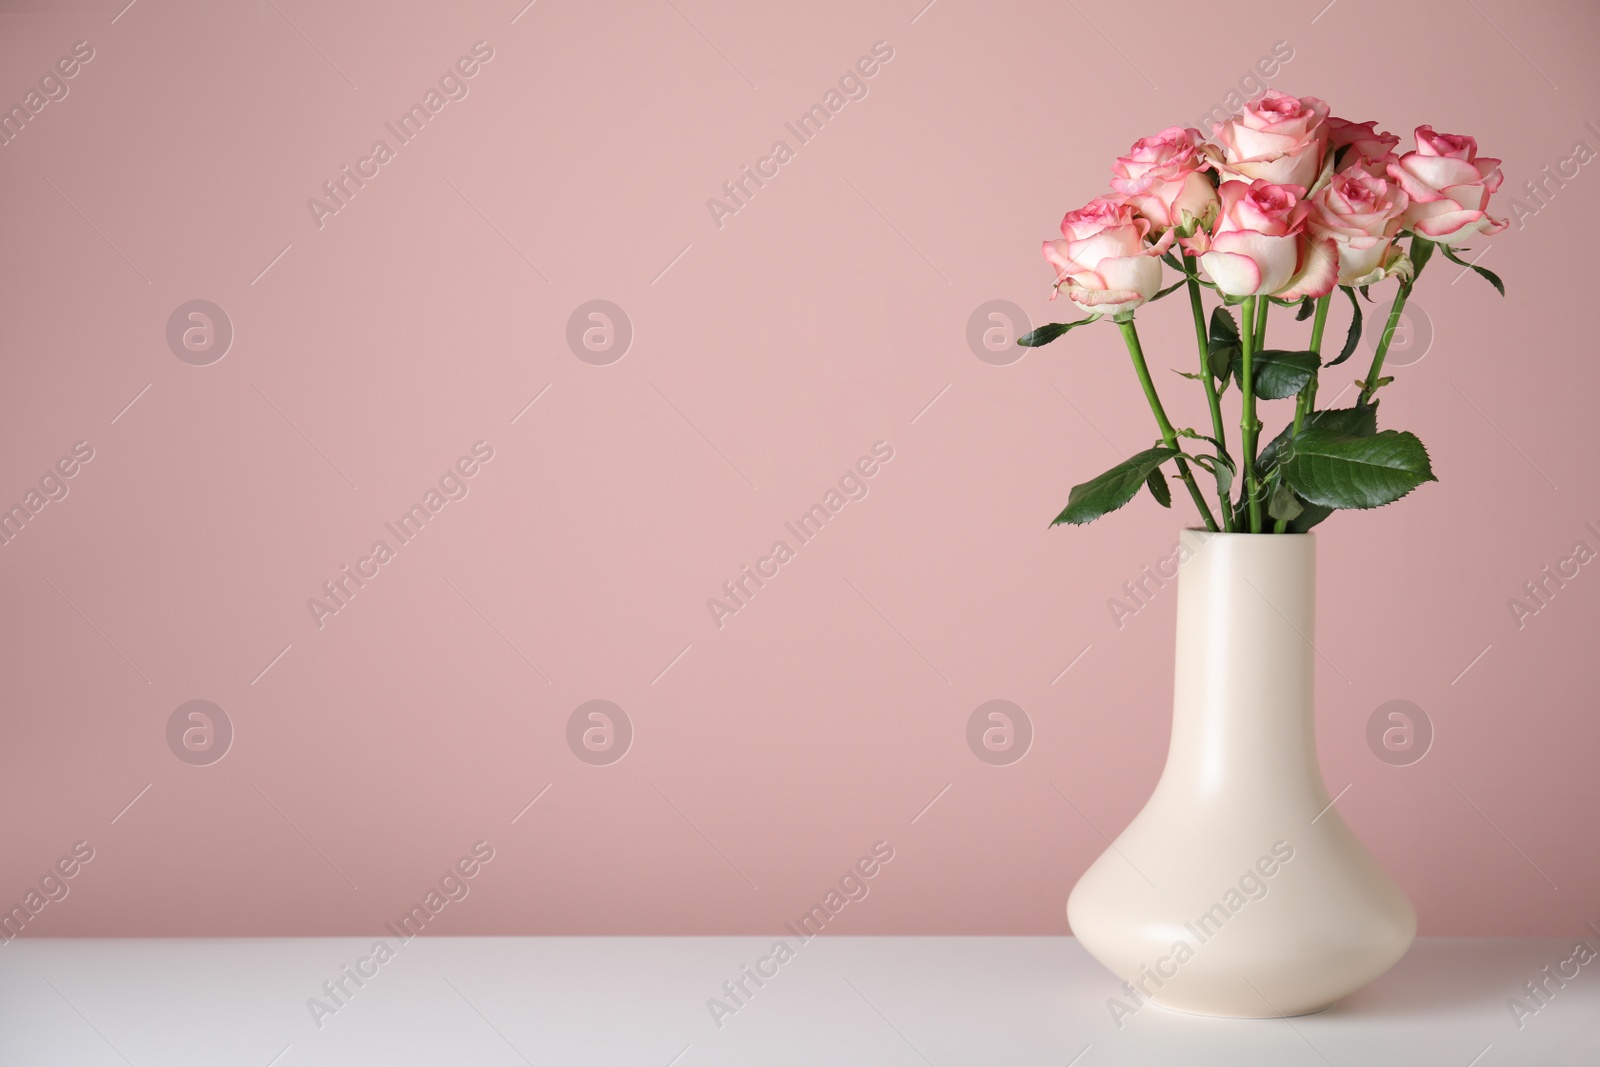 Photo of Vase with beautiful roses on white table against pink background. Space for text